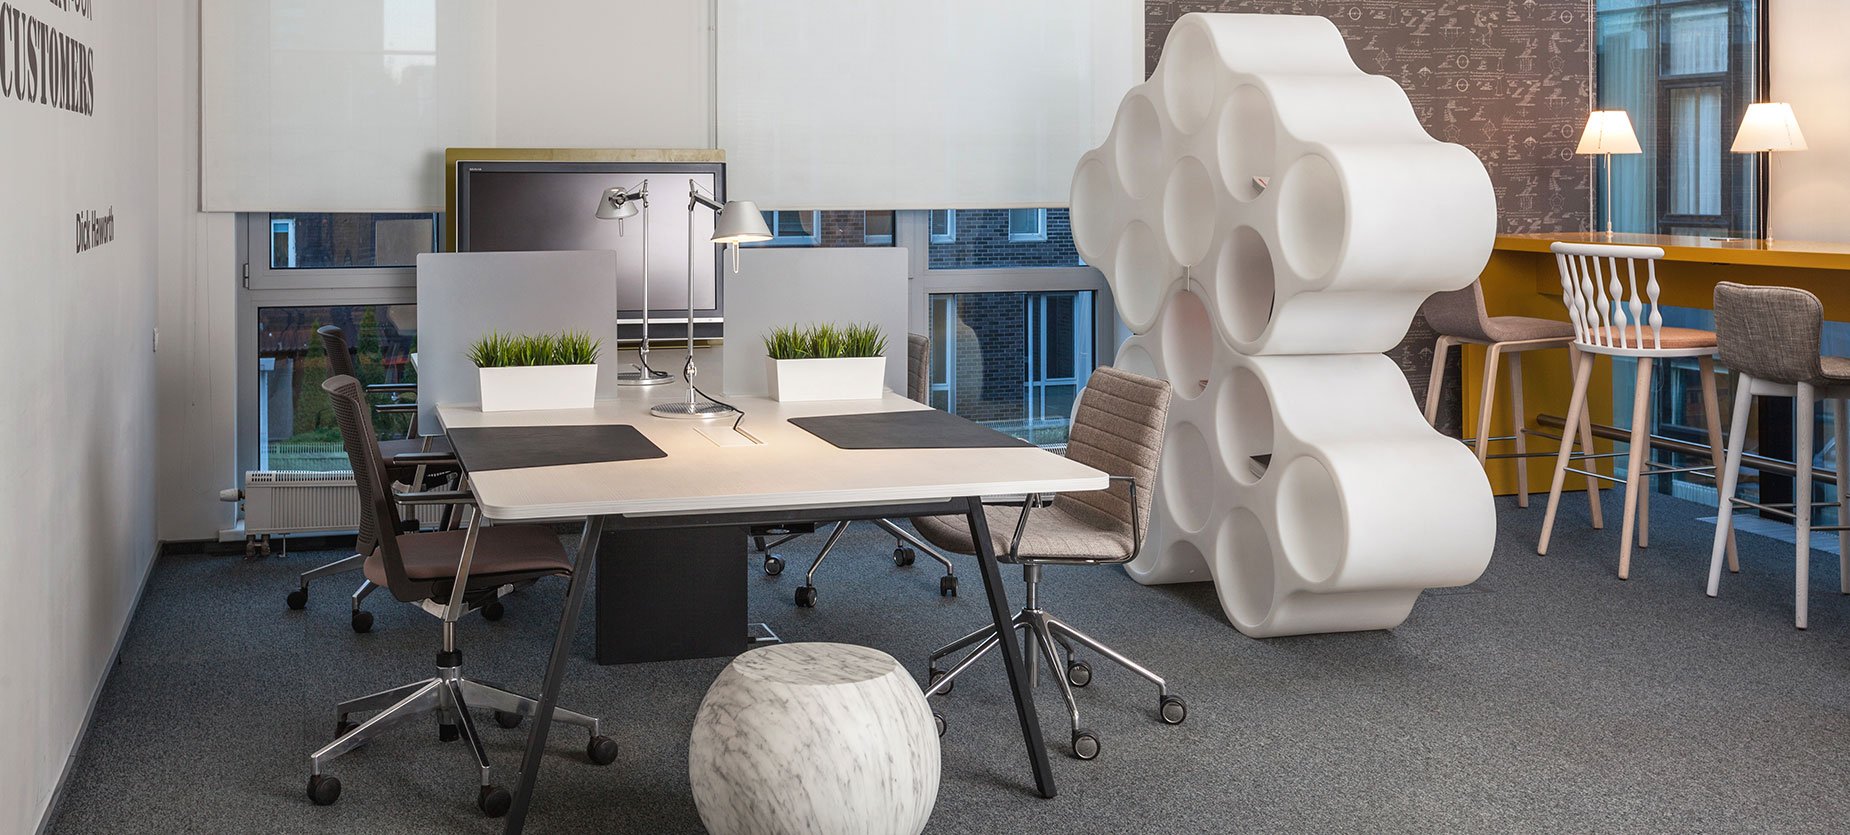 This hot-desking space features a four-person bench with movable screens and a display. Cloud storage serves as a space divider between desks and the bar table, which accommodates for sit/stand work.